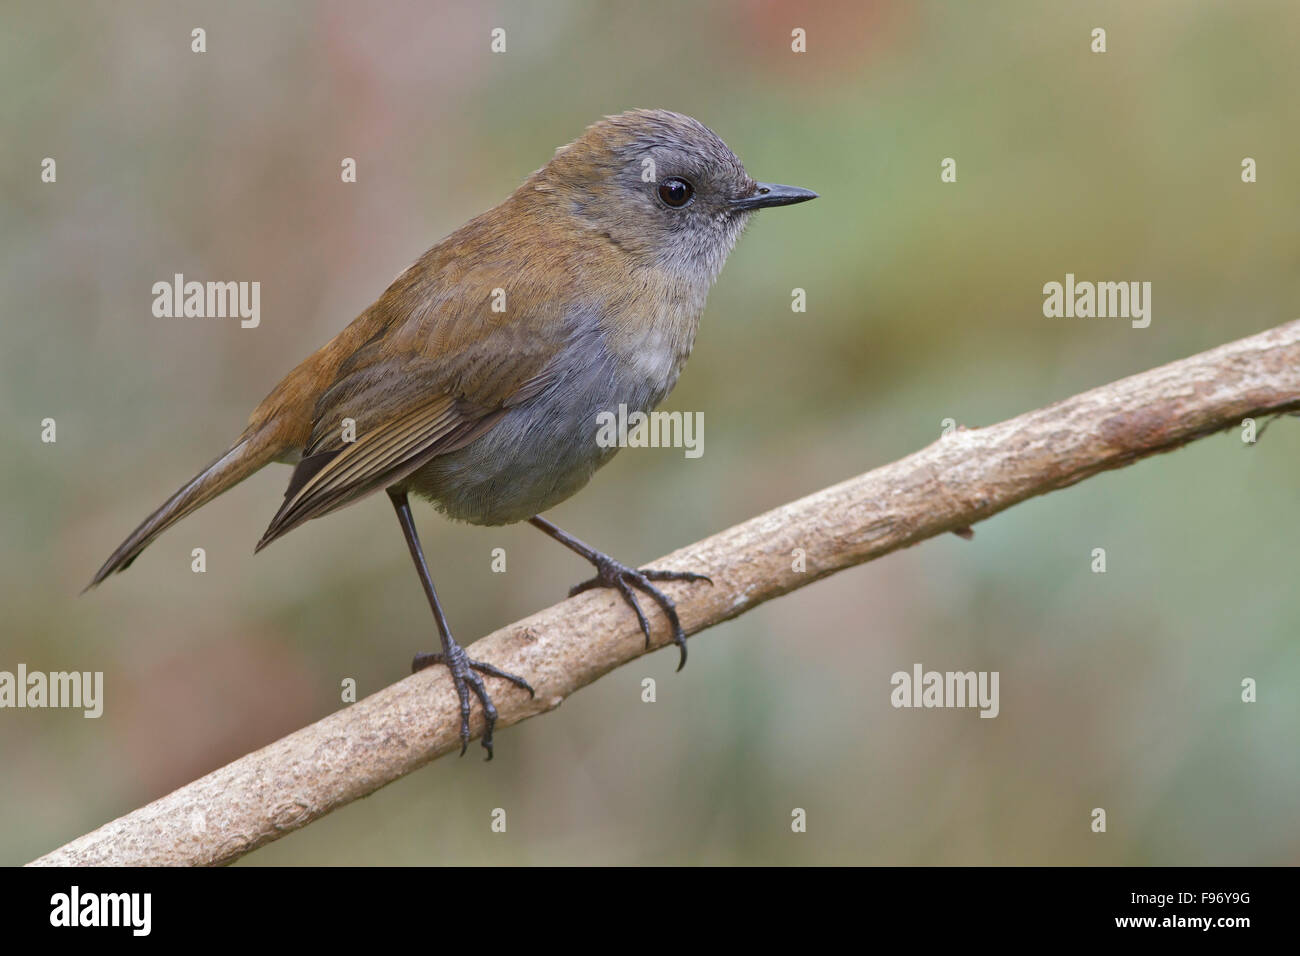 Blackbilled Nightingale Thrush (Catharus gracilirostris) perched on a branch in Costa Rica. Stock Photo